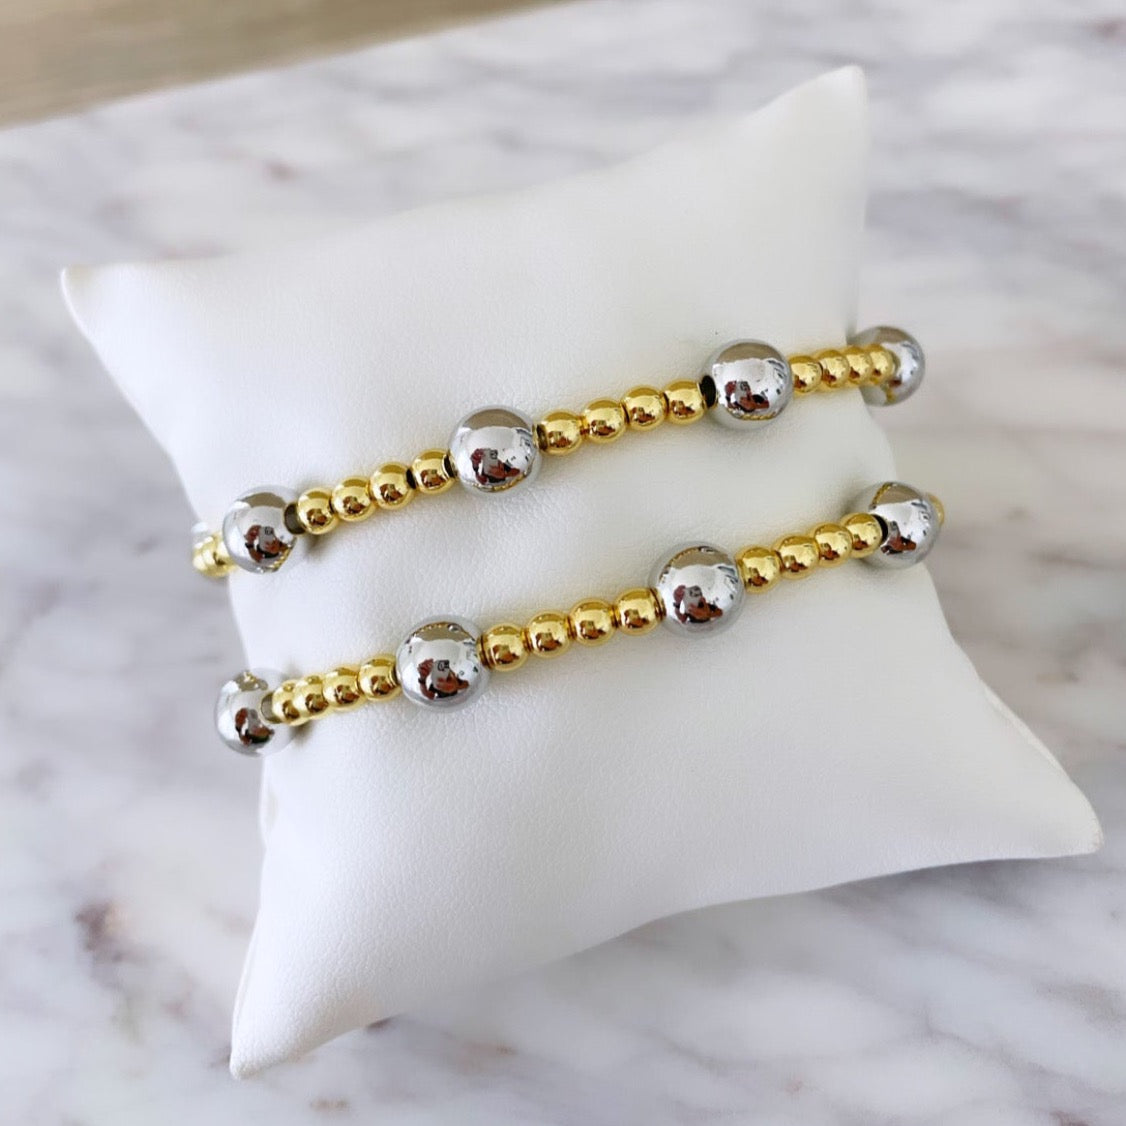 Gold and Silver Bead Bracelet - LimaLimón Store